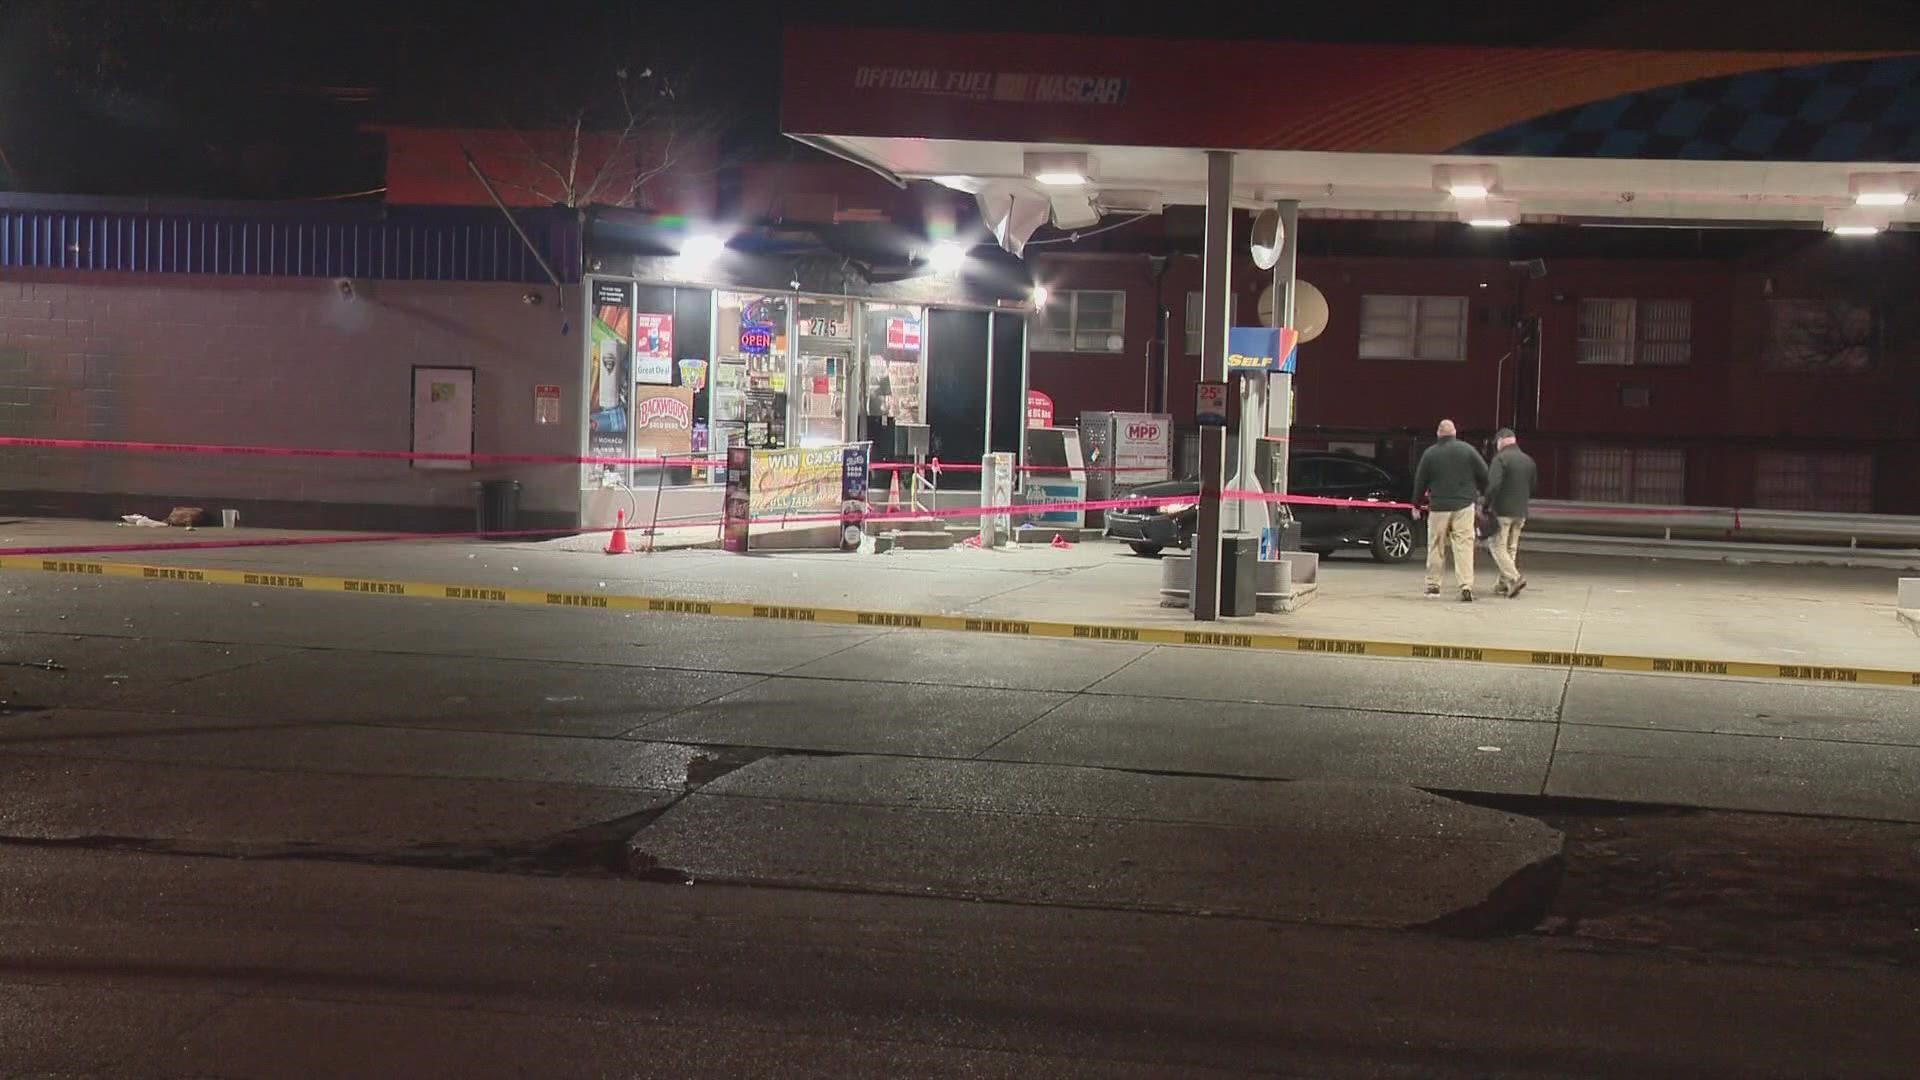 Police said a 21-year-old man was shot after refusing to give up his belongings during the robbery attempt.